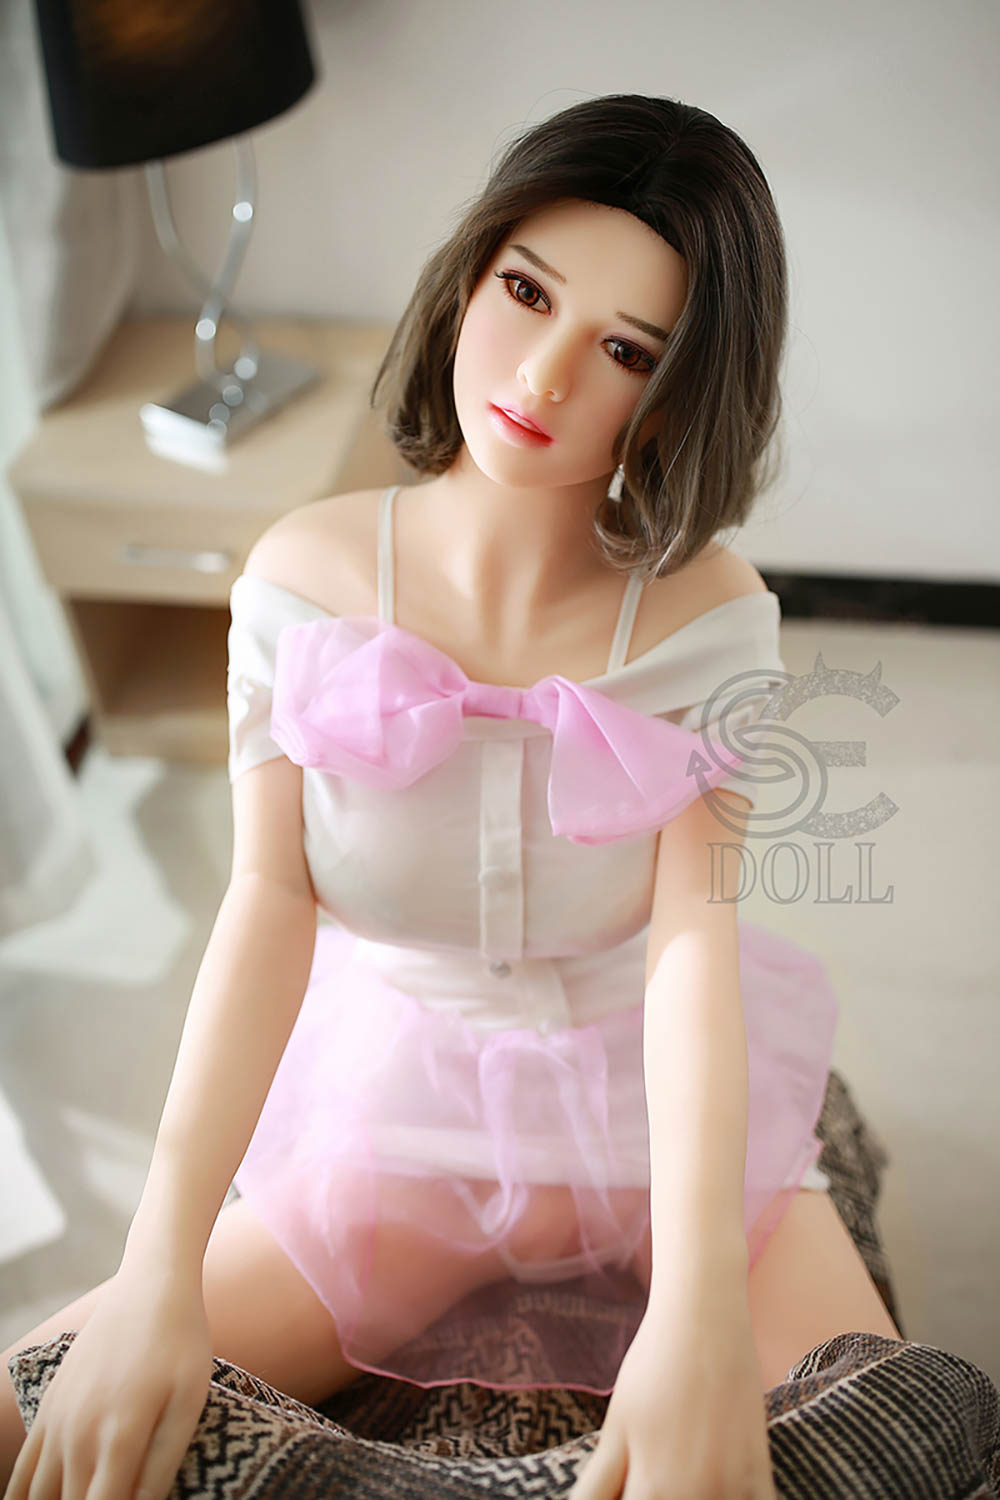 SEDOLL Gwendolyn, bambola sessuale in TPE con coppa D, 165 cm